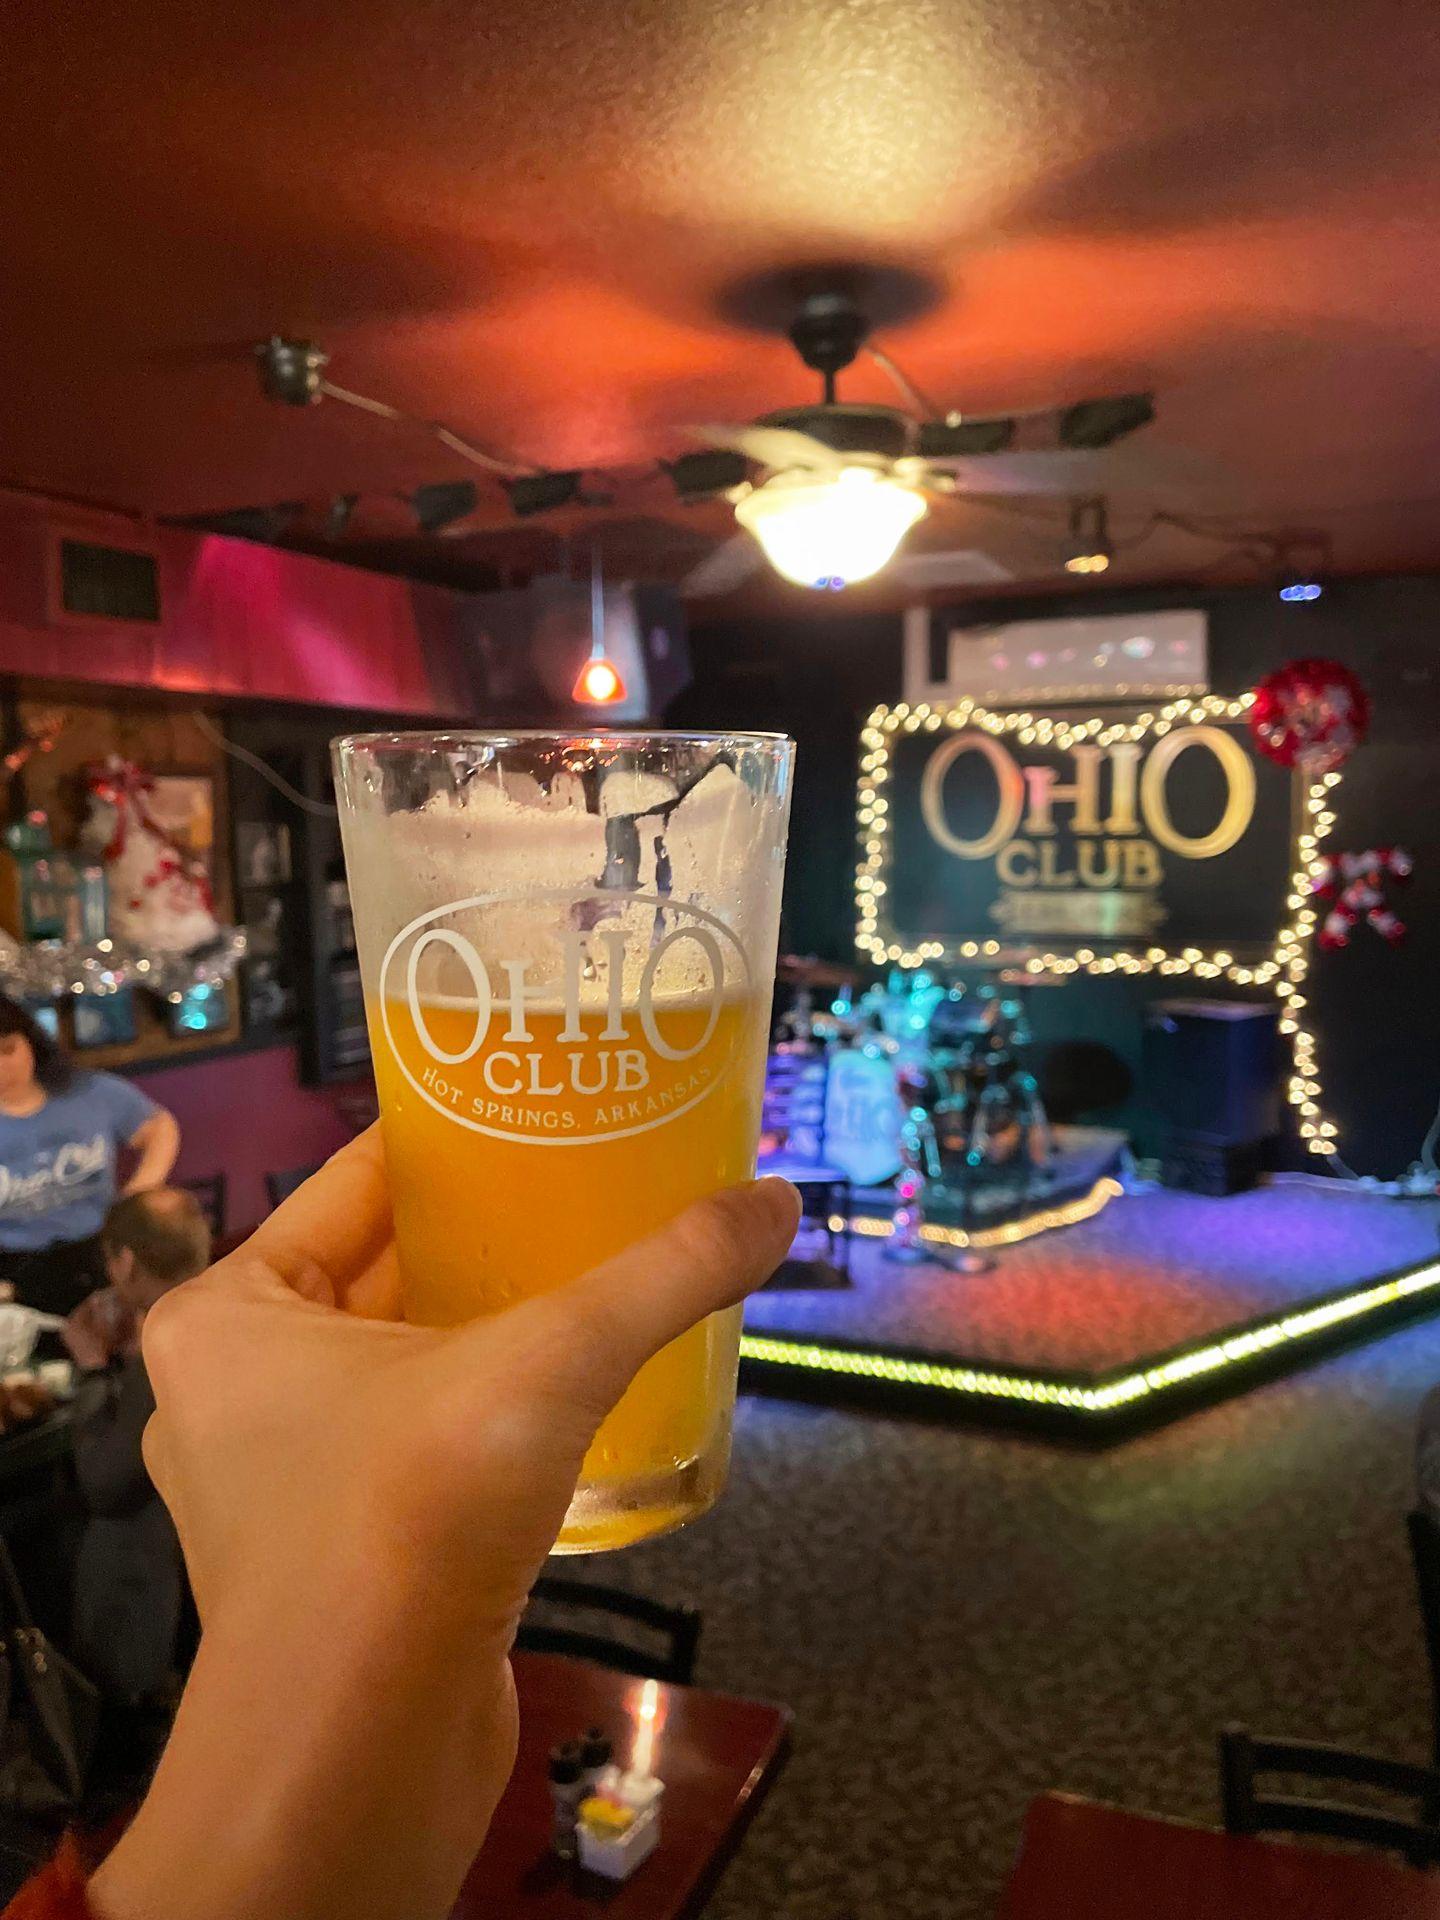 Holding up a beer inside of the Ohio Club. There is a stage for live music in the background.